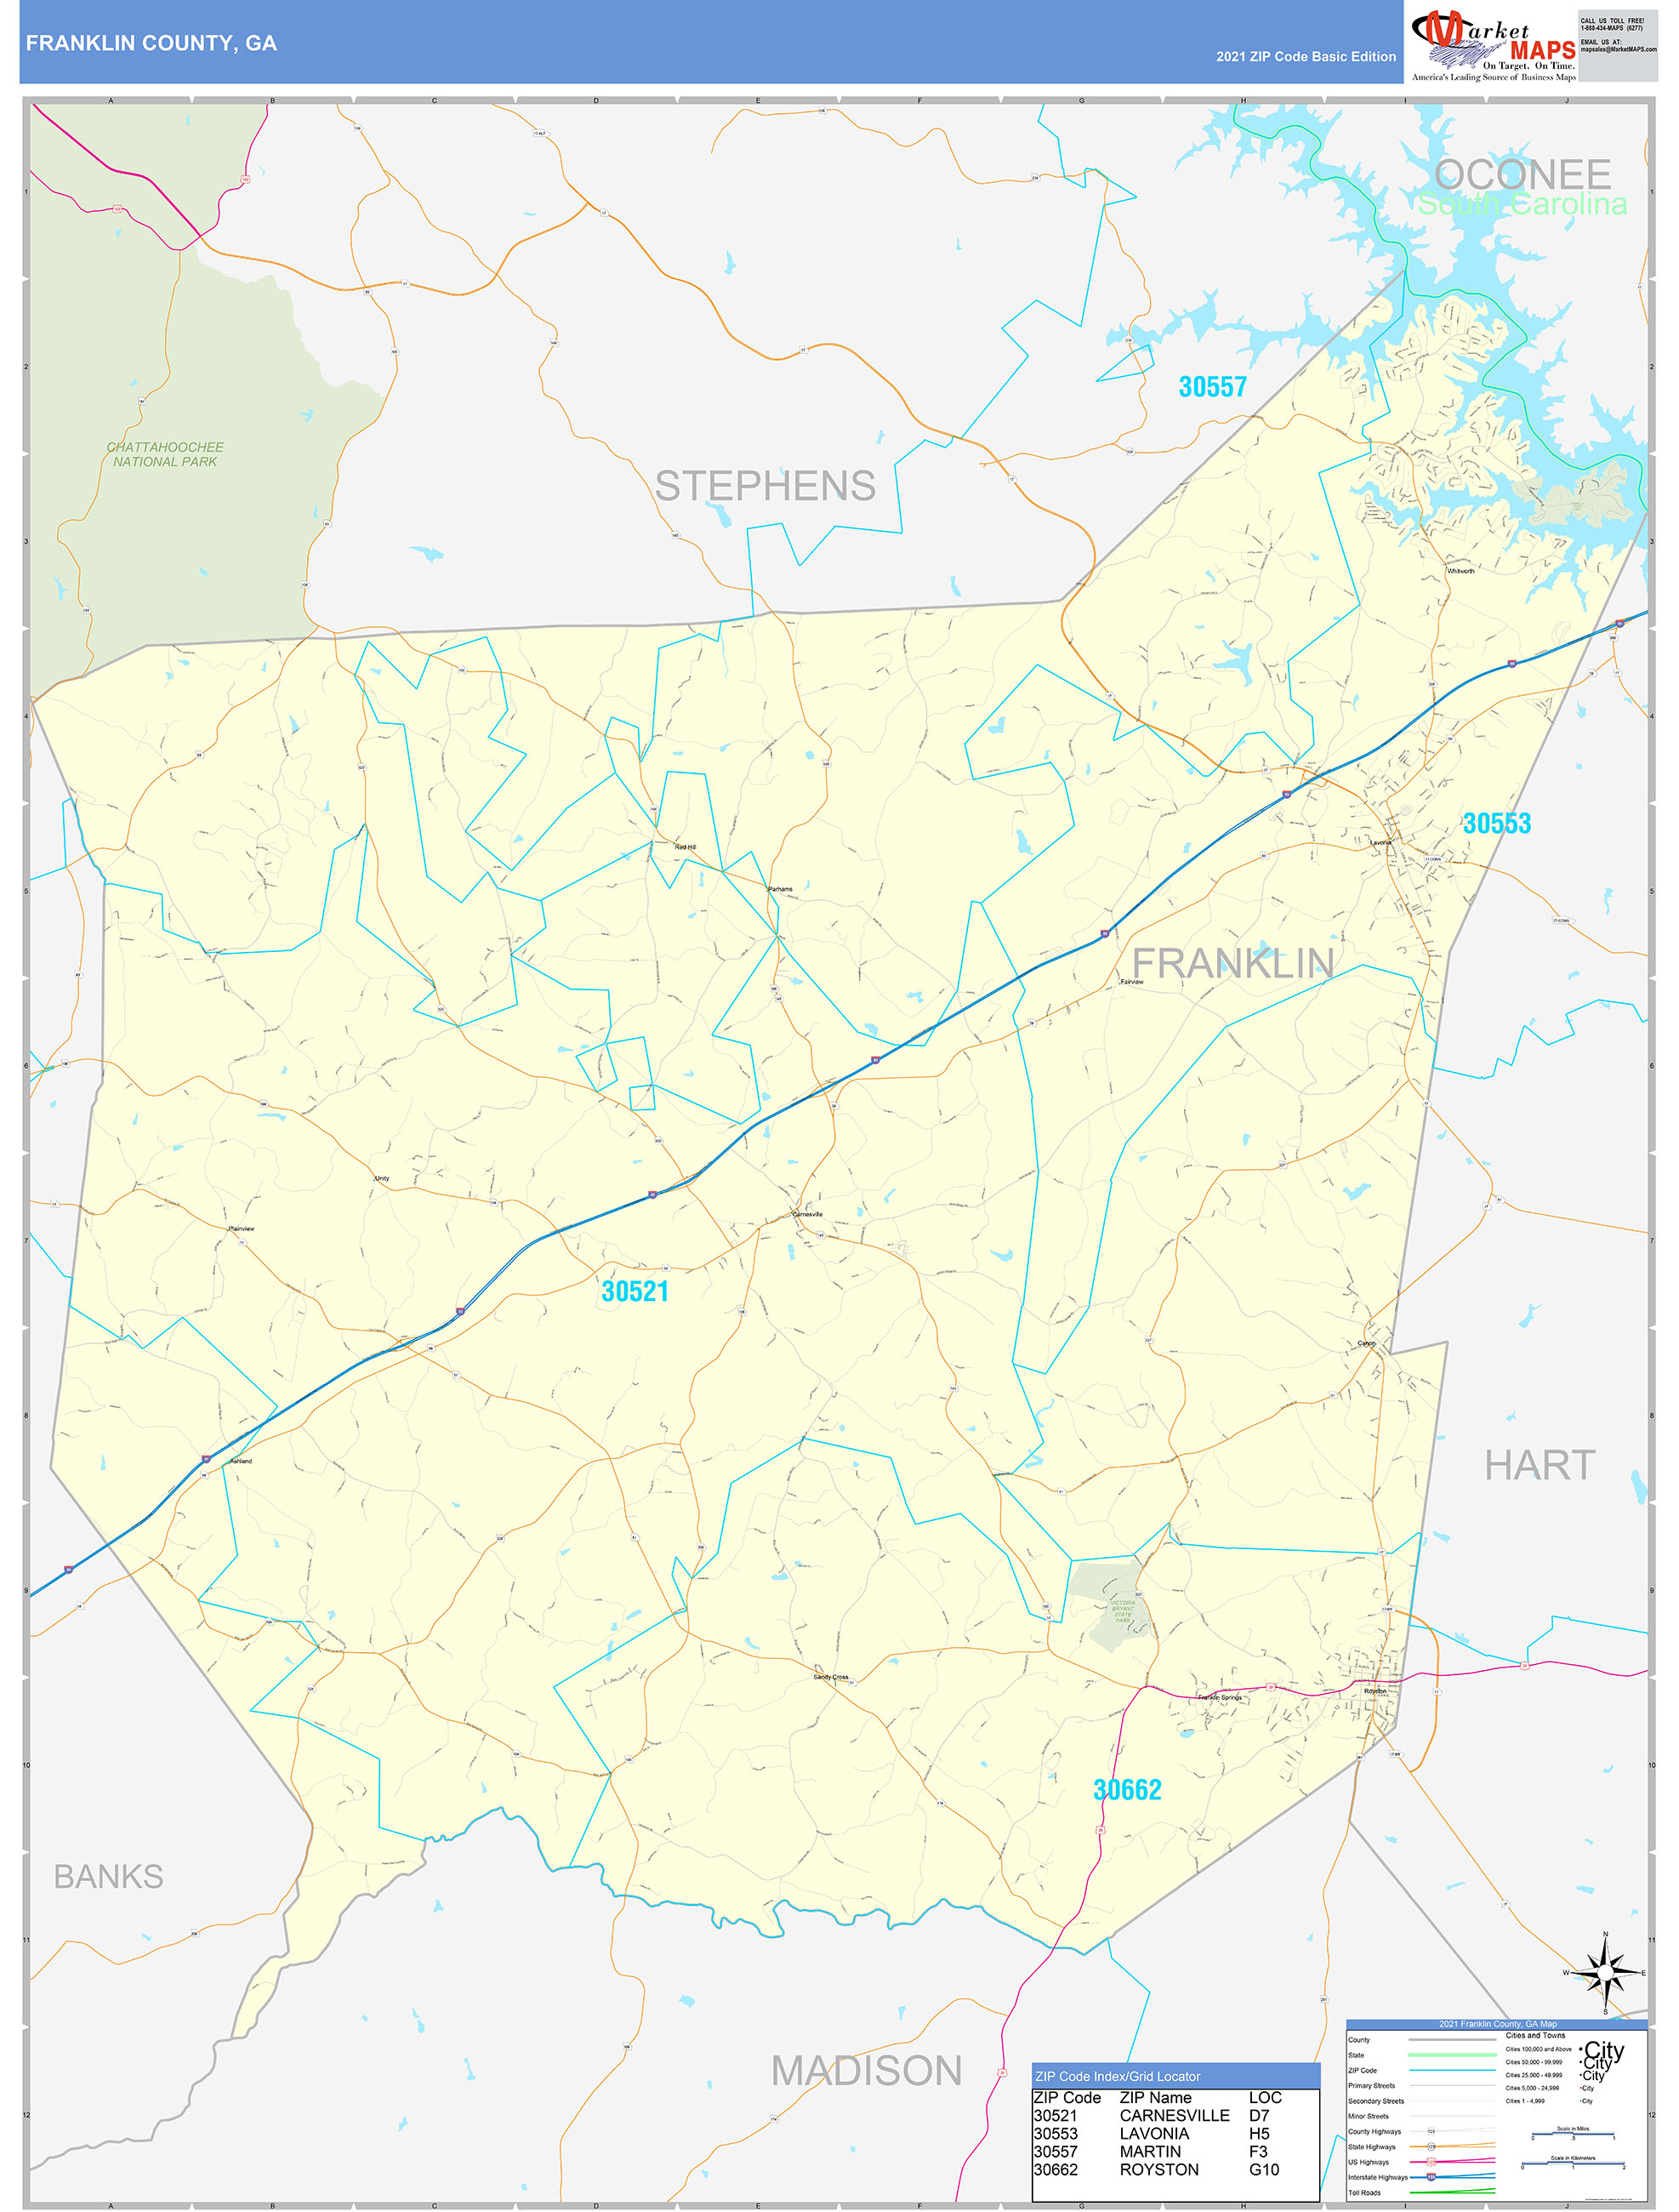 Franklin County, GA Zip Code Wall Map Basic Style by MarketMAPS MapSales